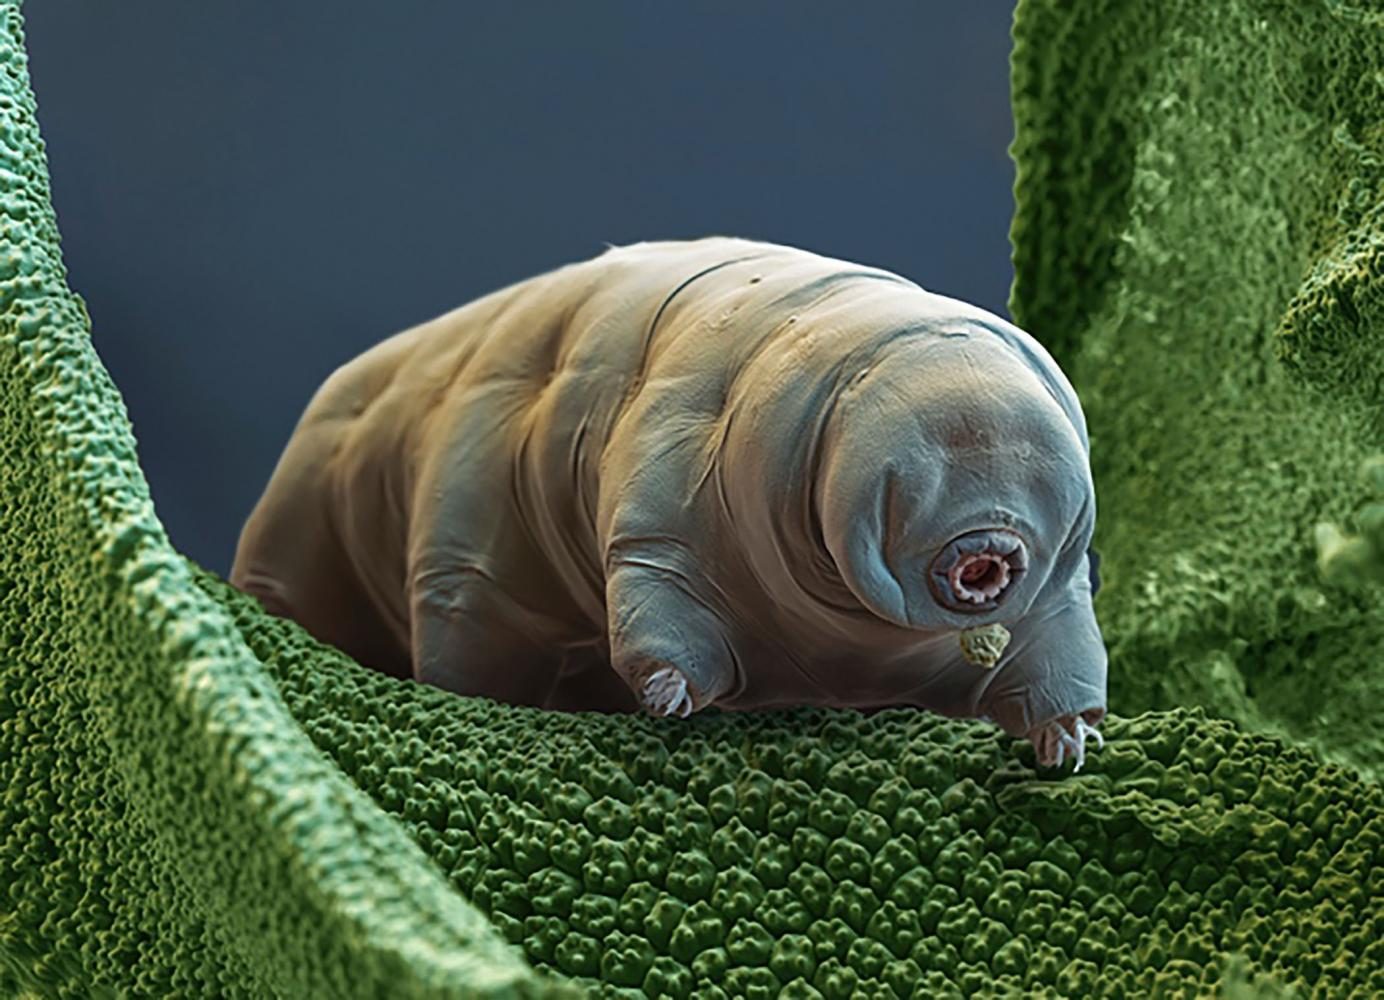 While+microscopic%2C+the+tardigrade+can+withstand+extreme+conditions+and+still+live.